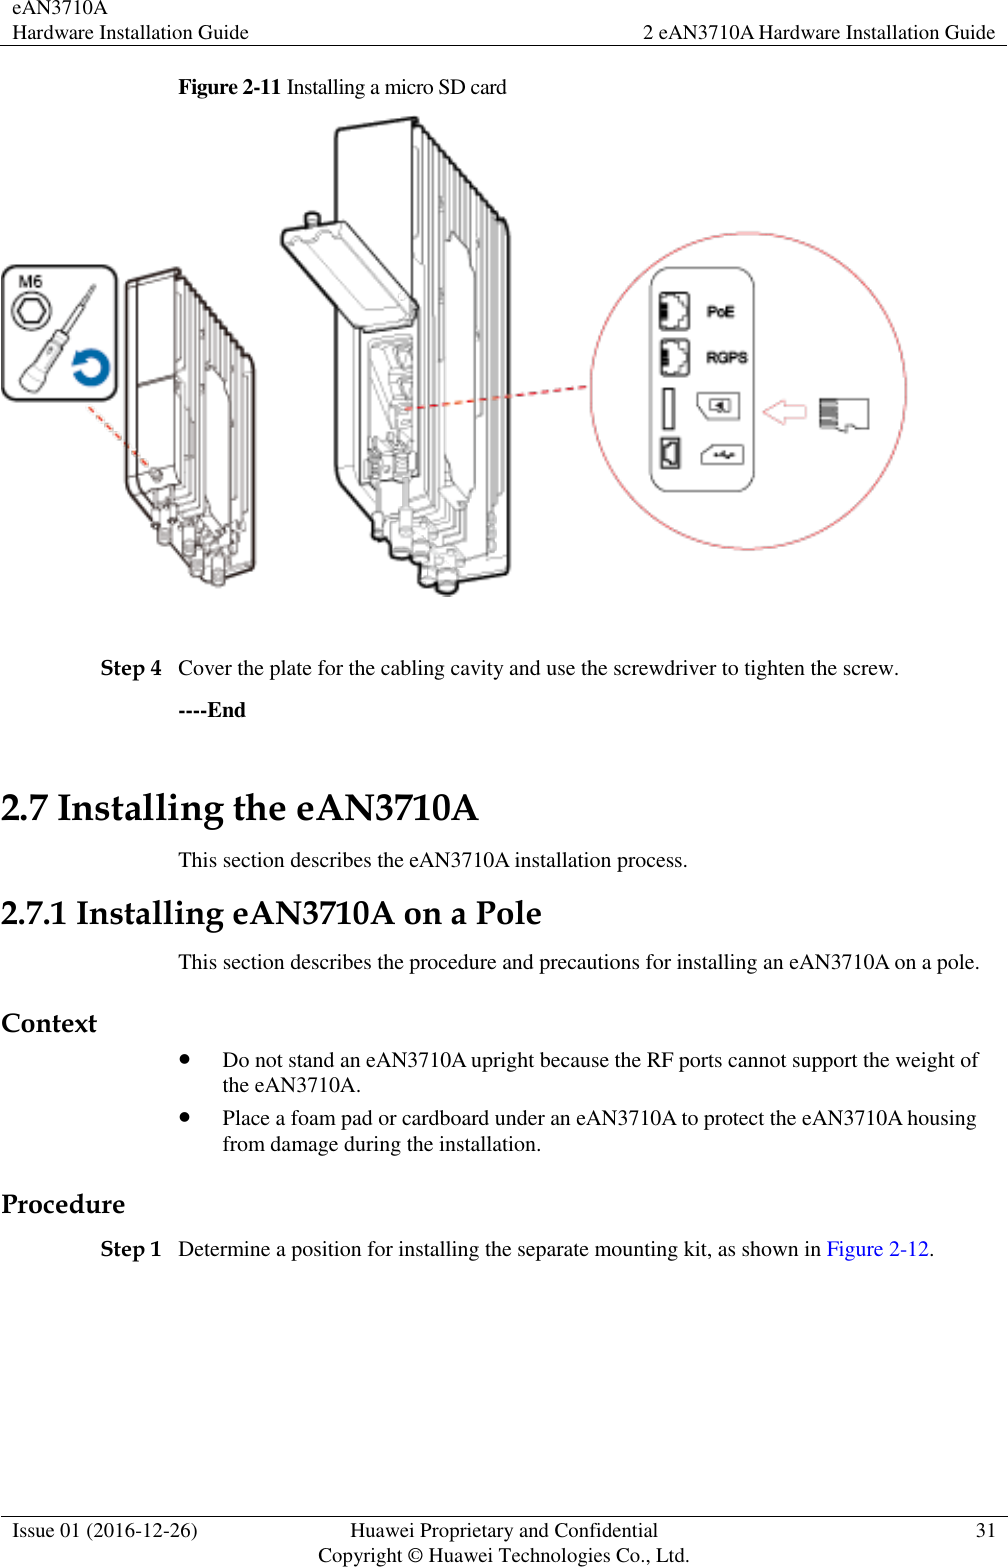 eAN3710A Hardware Installation Guide 2 eAN3710A Hardware Installation Guide  Issue 01 (2016-12-26) Huawei Proprietary and Confidential                                     Copyright © Huawei Technologies Co., Ltd. 31  Figure 2-11 Installing a micro SD card   Step 4 Cover the plate for the cabling cavity and use the screwdriver to tighten the screw. ----End 2.7 Installing the eAN3710A This section describes the eAN3710A installation process. 2.7.1 Installing eAN3710A on a Pole This section describes the procedure and precautions for installing an eAN3710A on a pole. Context  Do not stand an eAN3710A upright because the RF ports cannot support the weight of the eAN3710A.  Place a foam pad or cardboard under an eAN3710A to protect the eAN3710A housing from damage during the installation. Procedure Step 1 Determine a position for installing the separate mounting kit, as shown in Figure 2-12. 